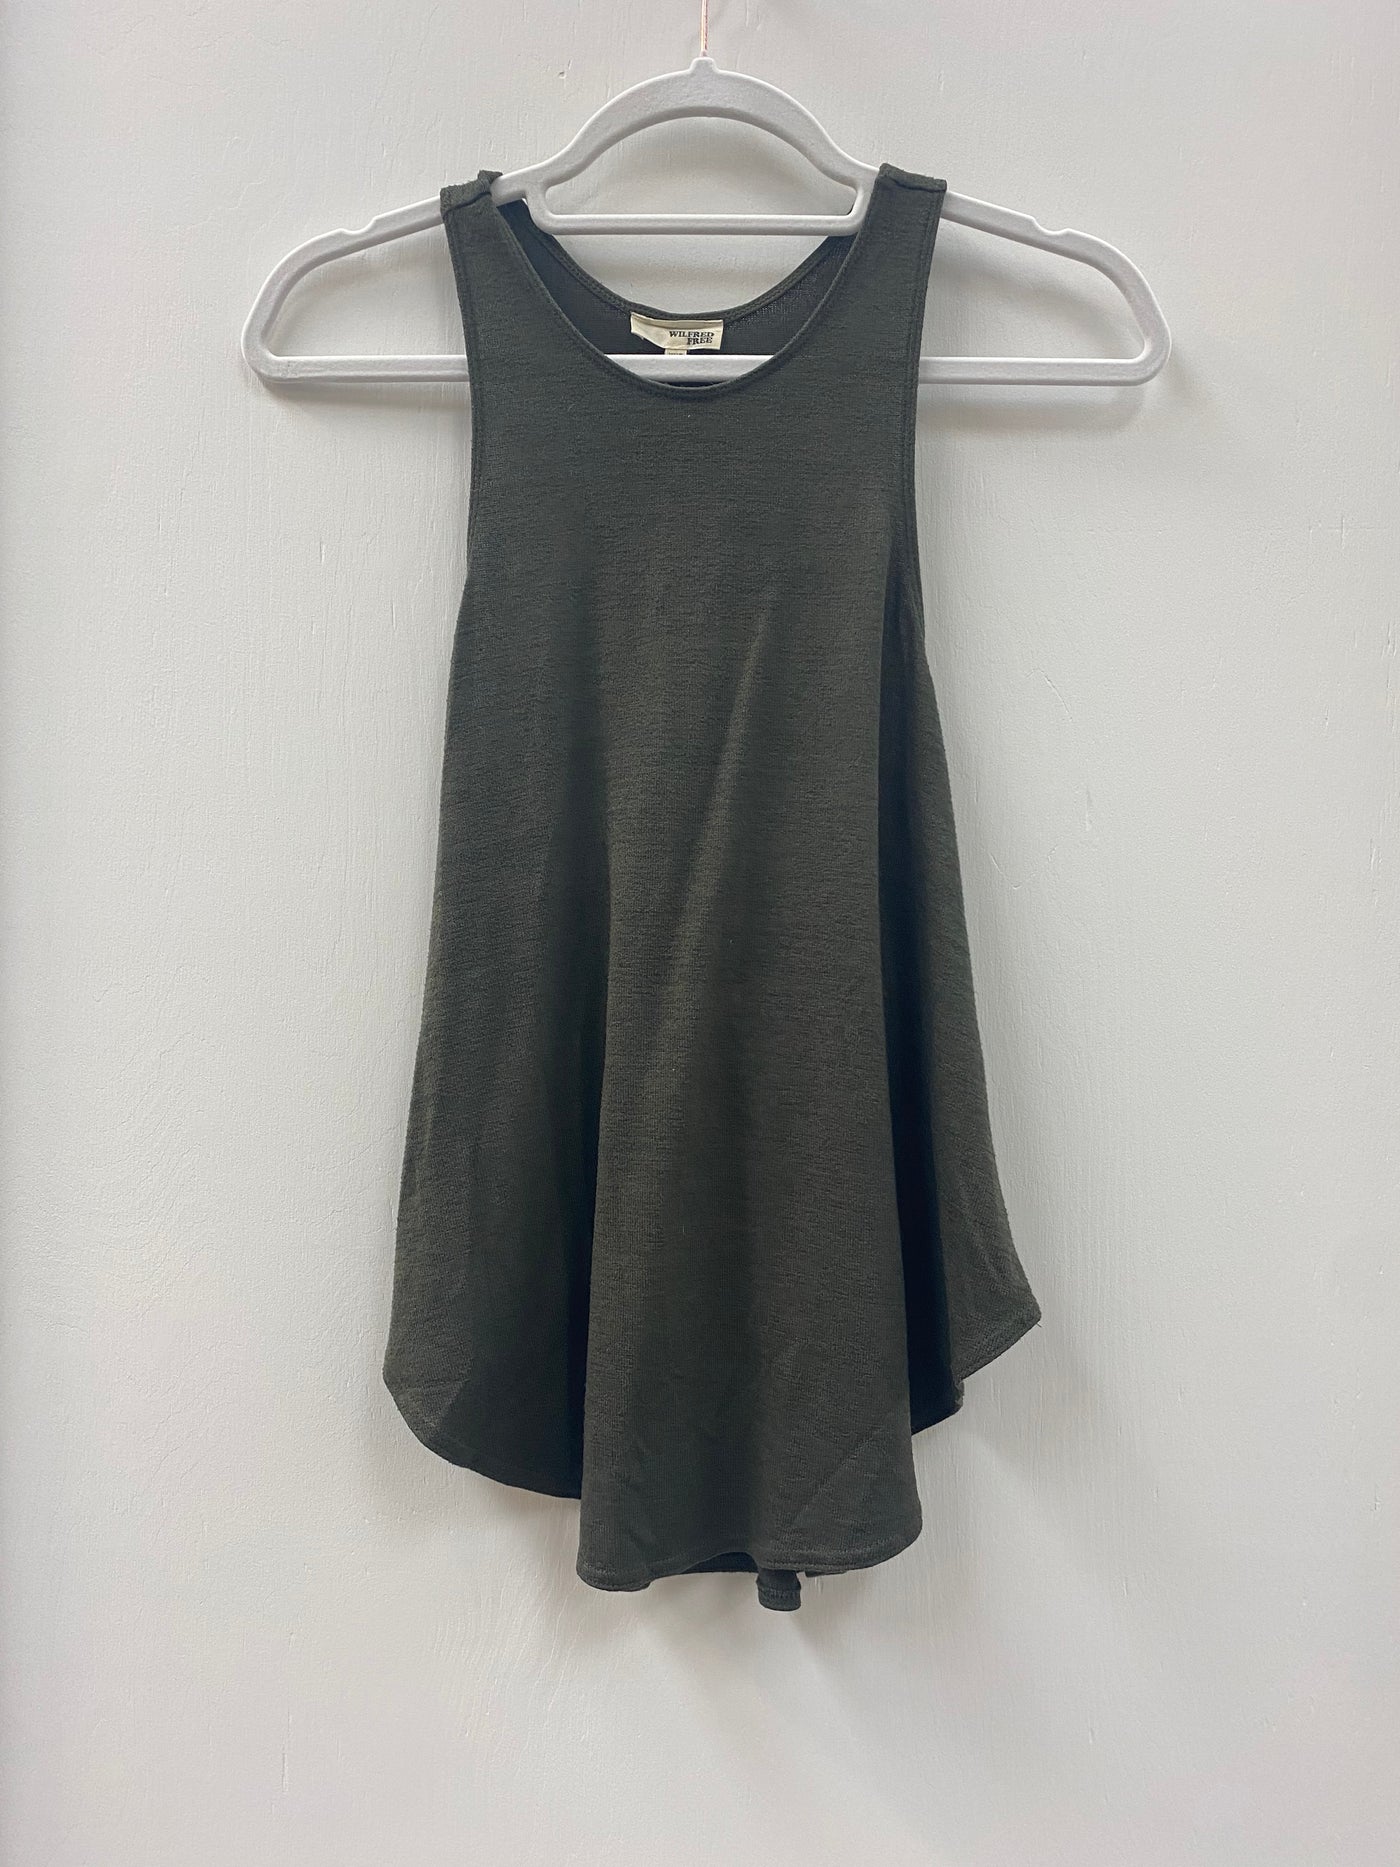 Wilfred Free tank top